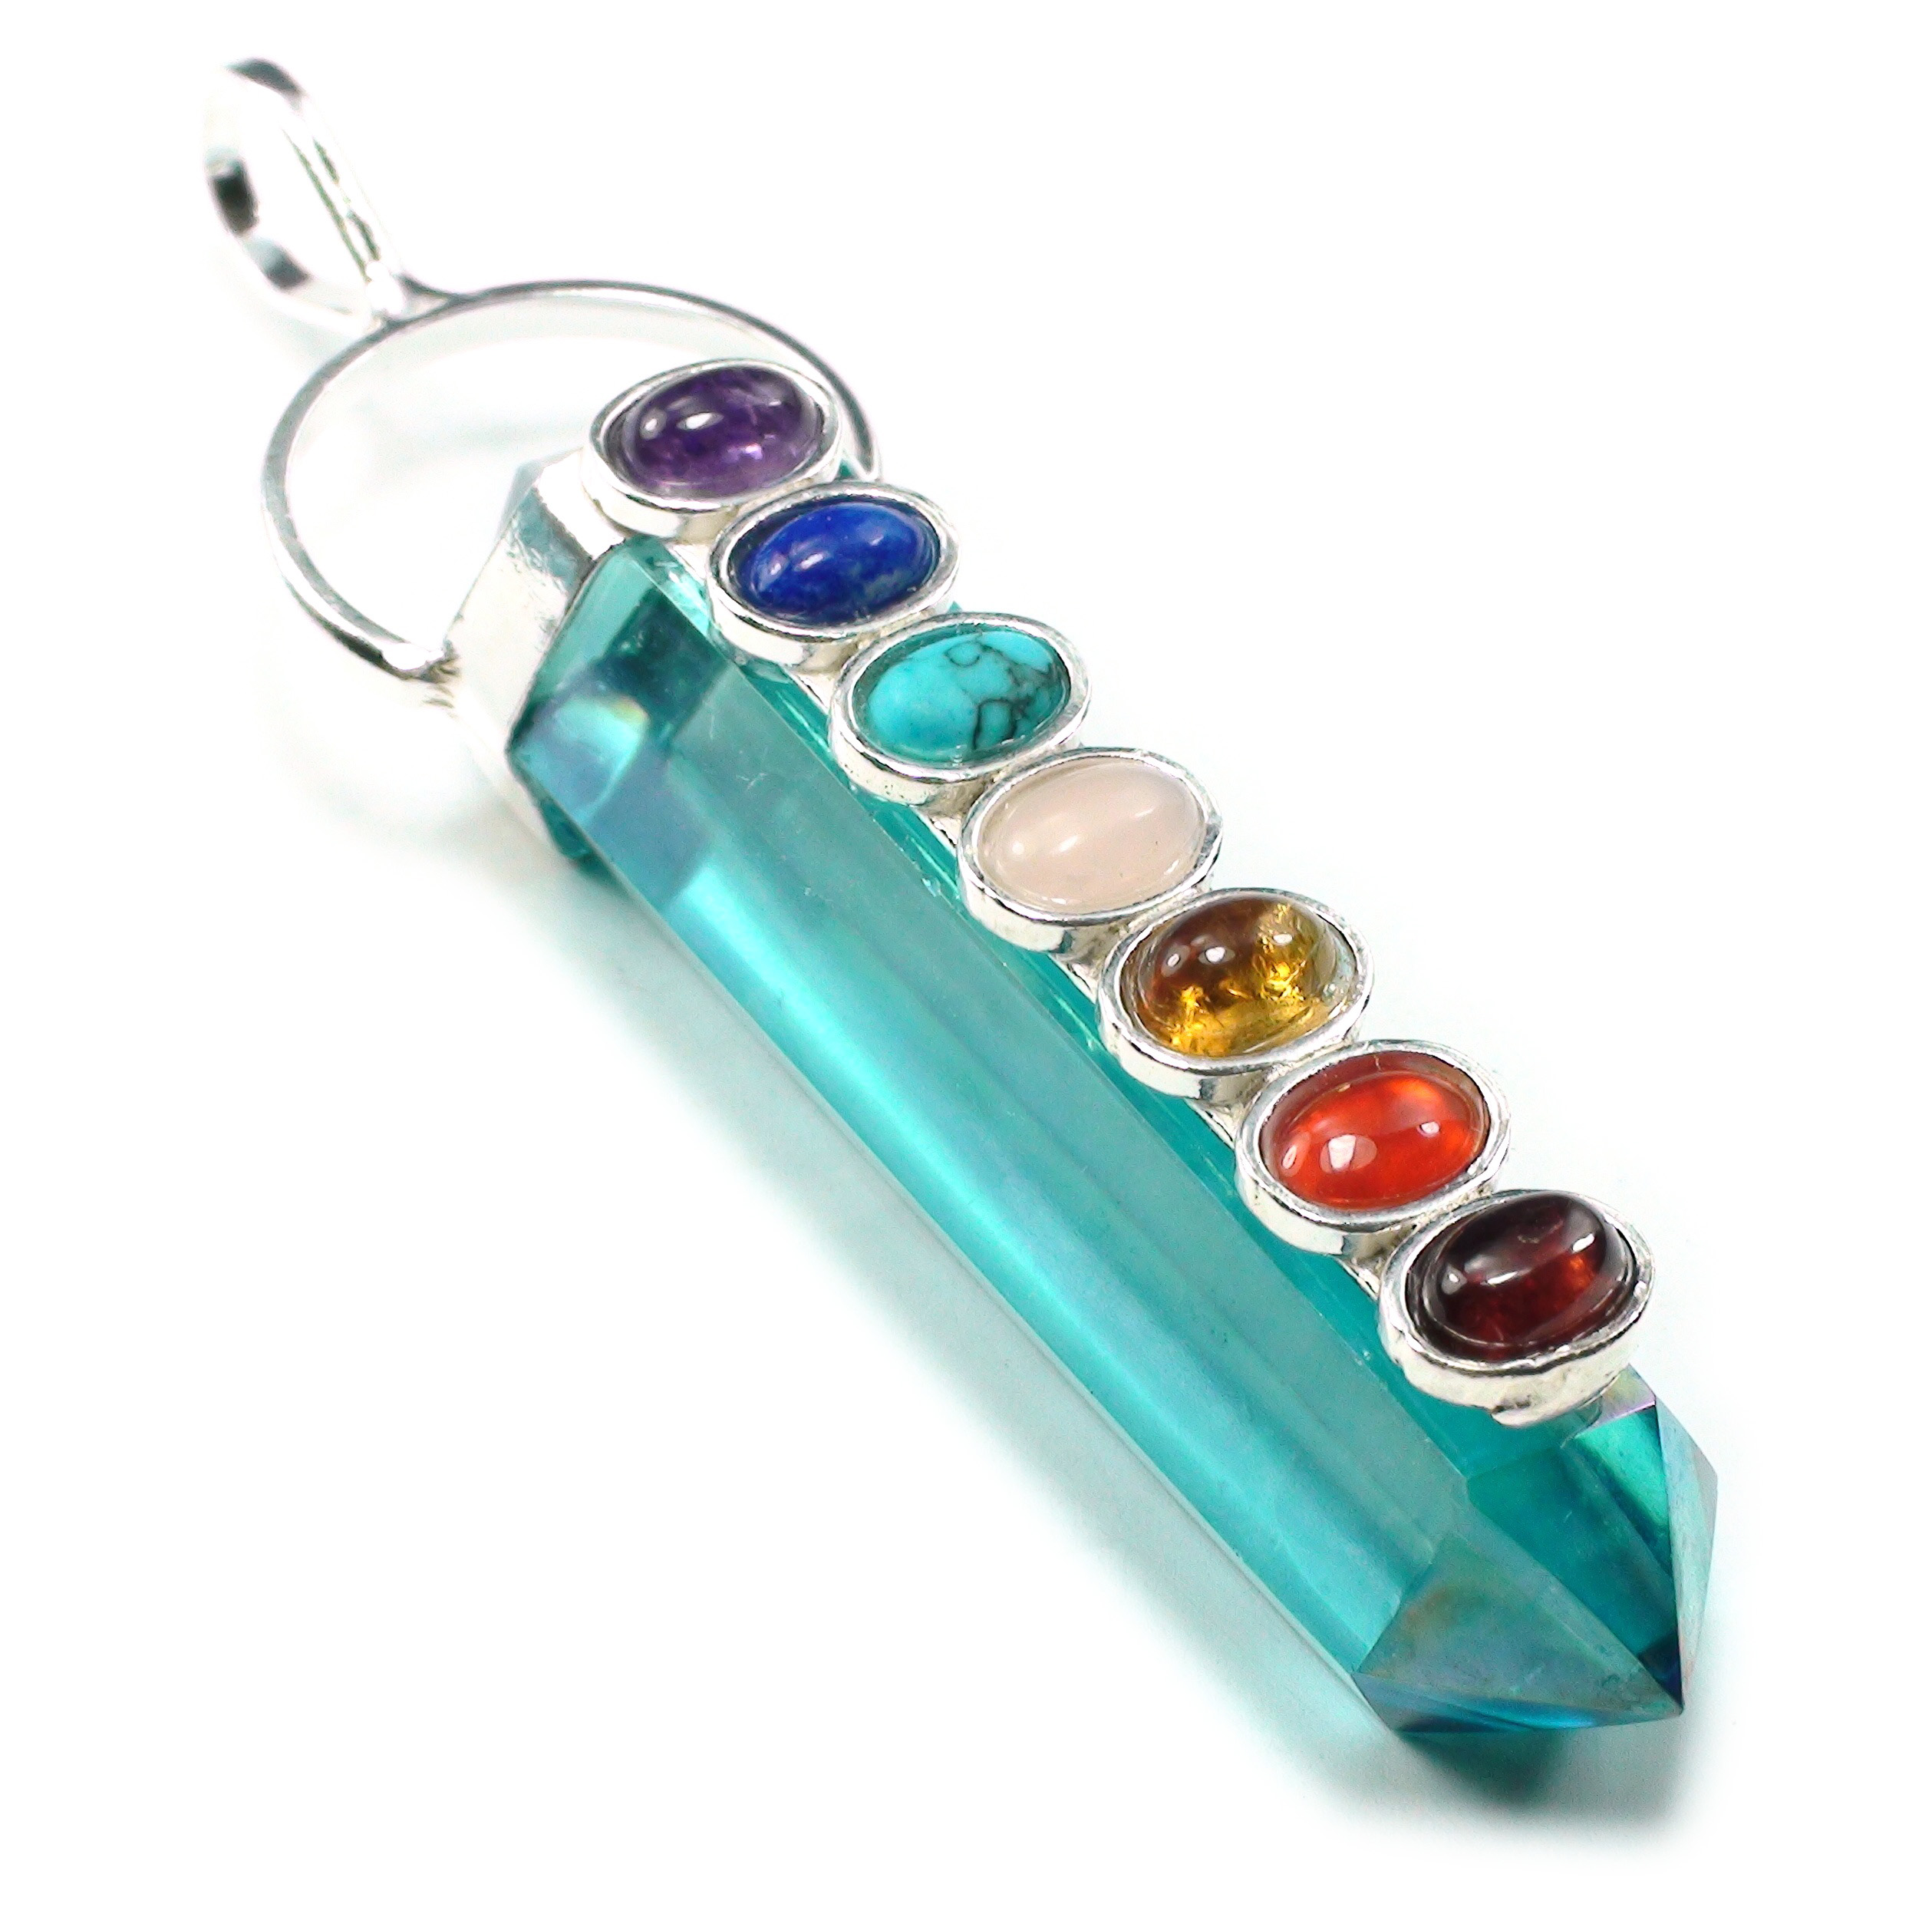 New Age and Metaphysical tool ready to wear double terminated aqua aura crystal and 7 chakra gemstone cabochons set in sterling silver pendant.